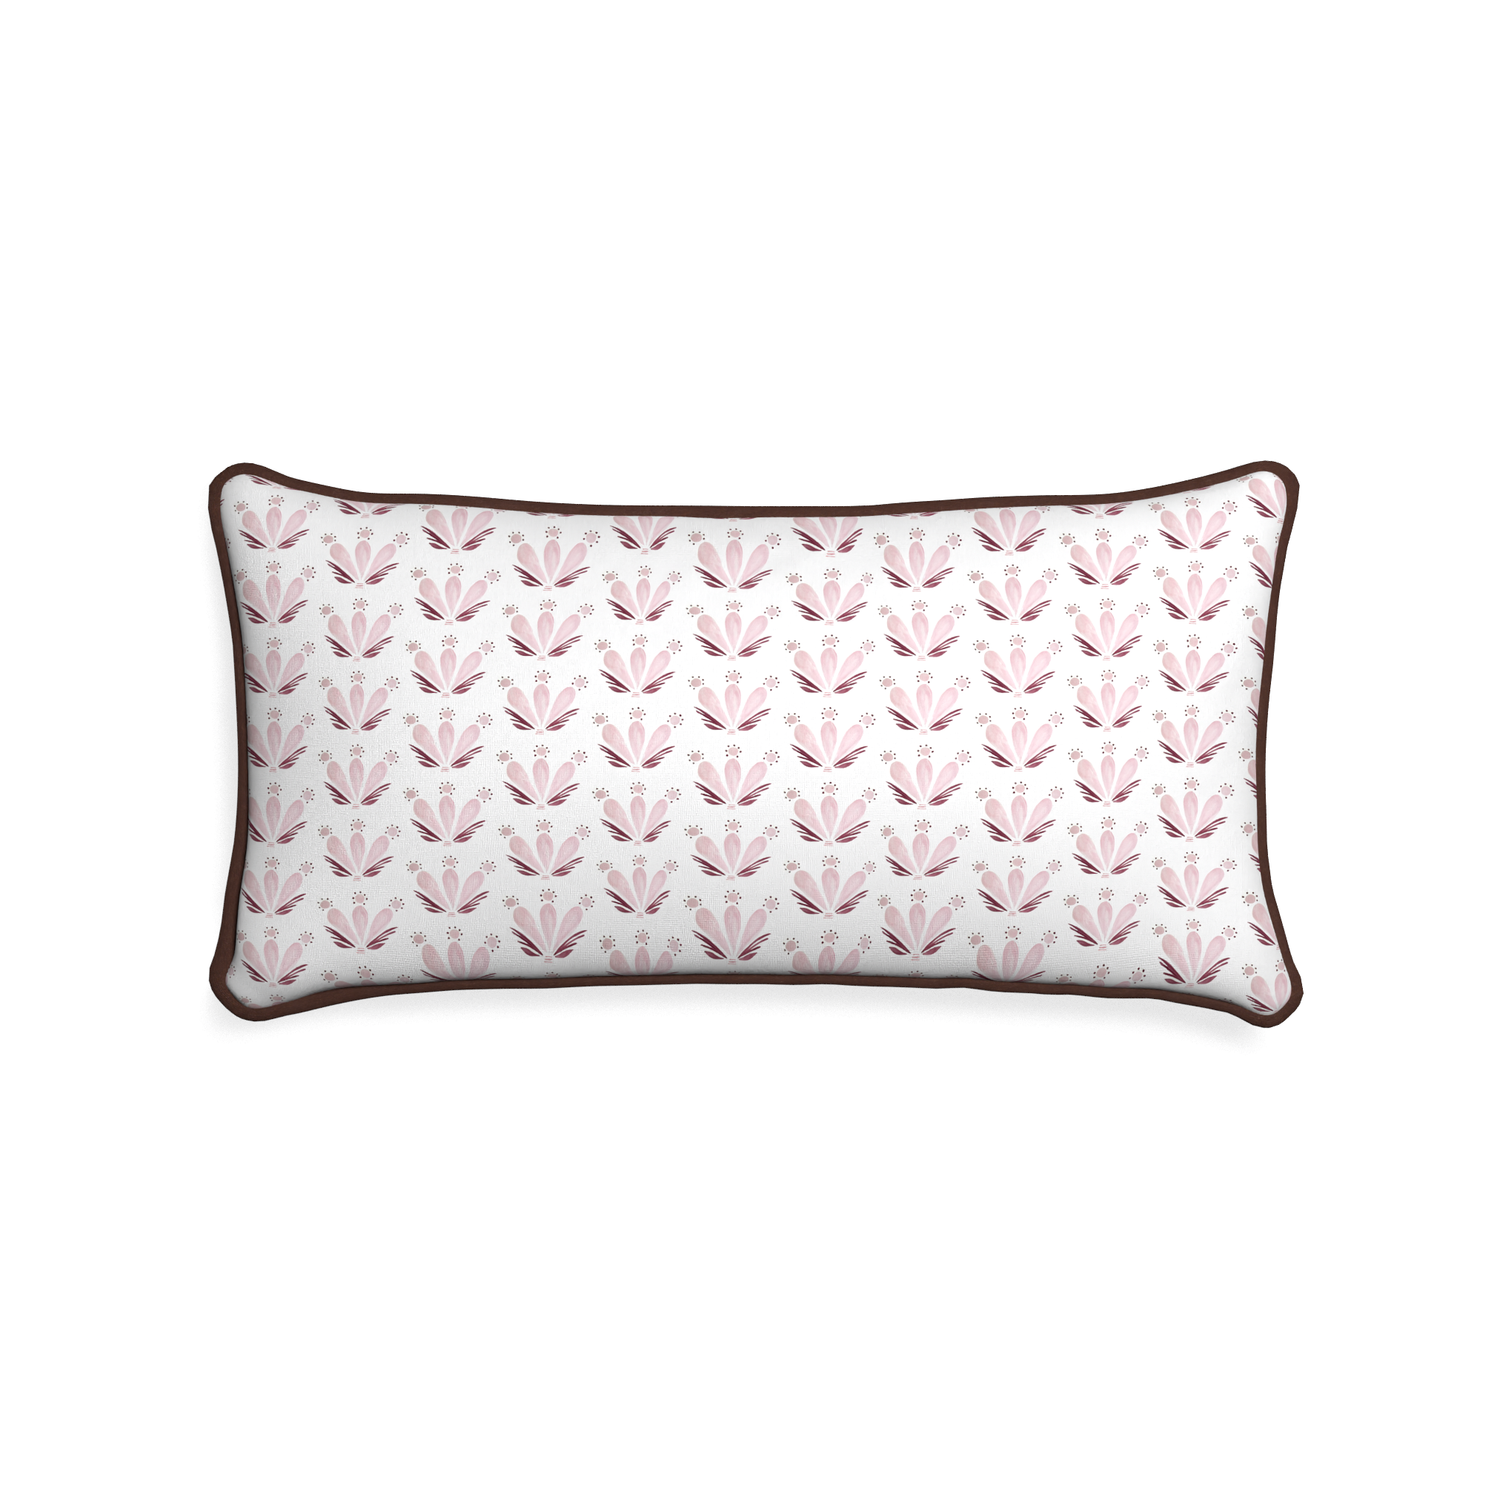 Midi-lumbar serena pink custom pink & burgundy drop repeat floralpillow with w piping on white background